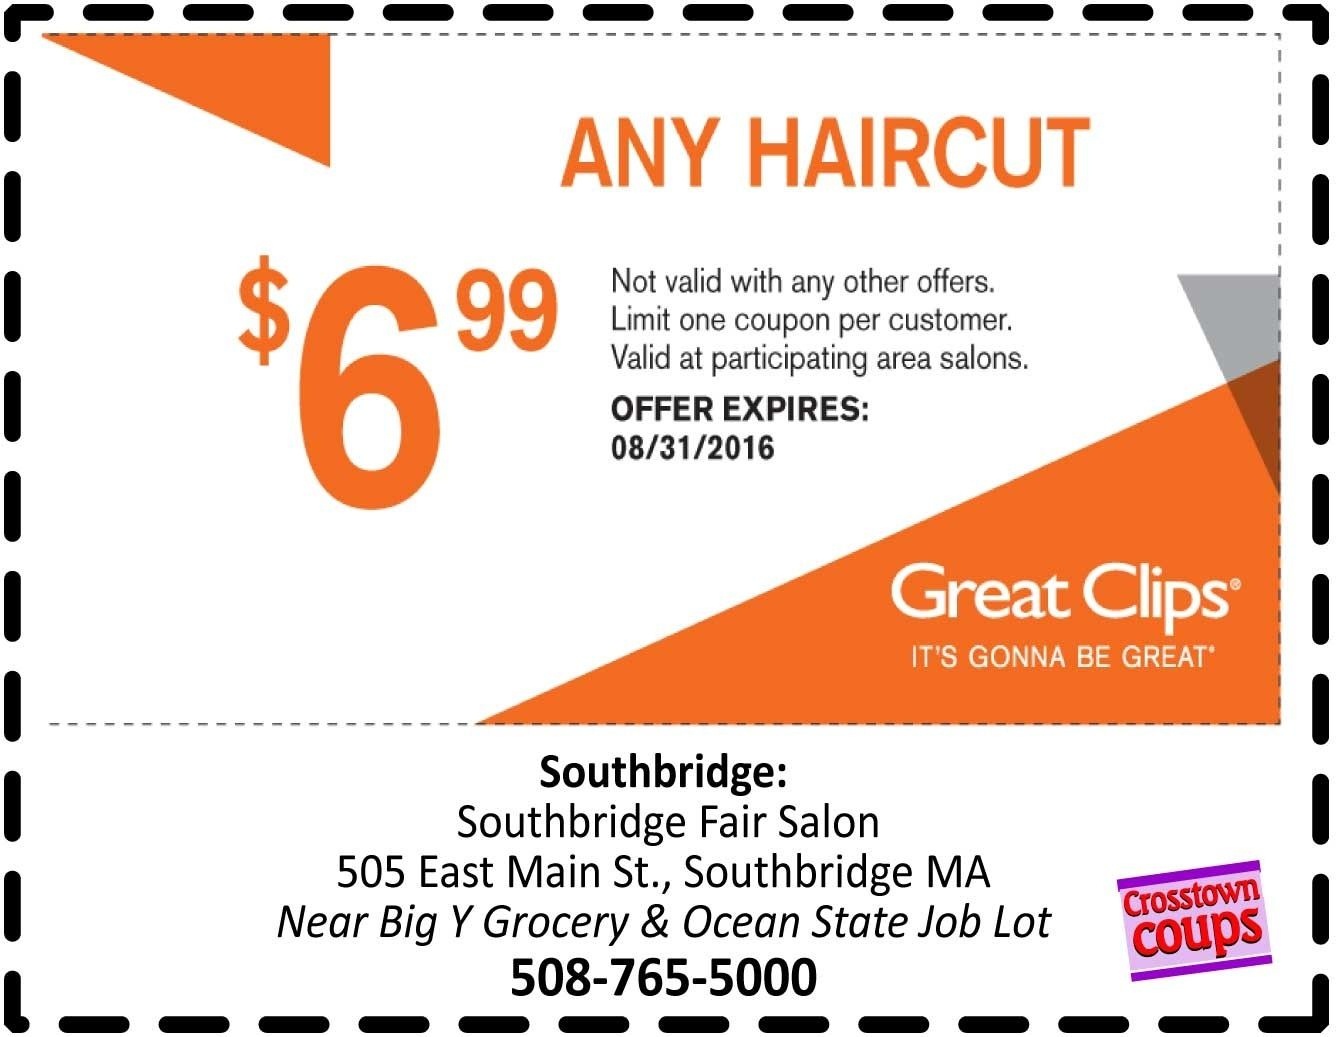 Great Clips Haircut Sale - Easy Wedding 2017 - Wedding.brainjobs - Great Clips Free Coupons Printable